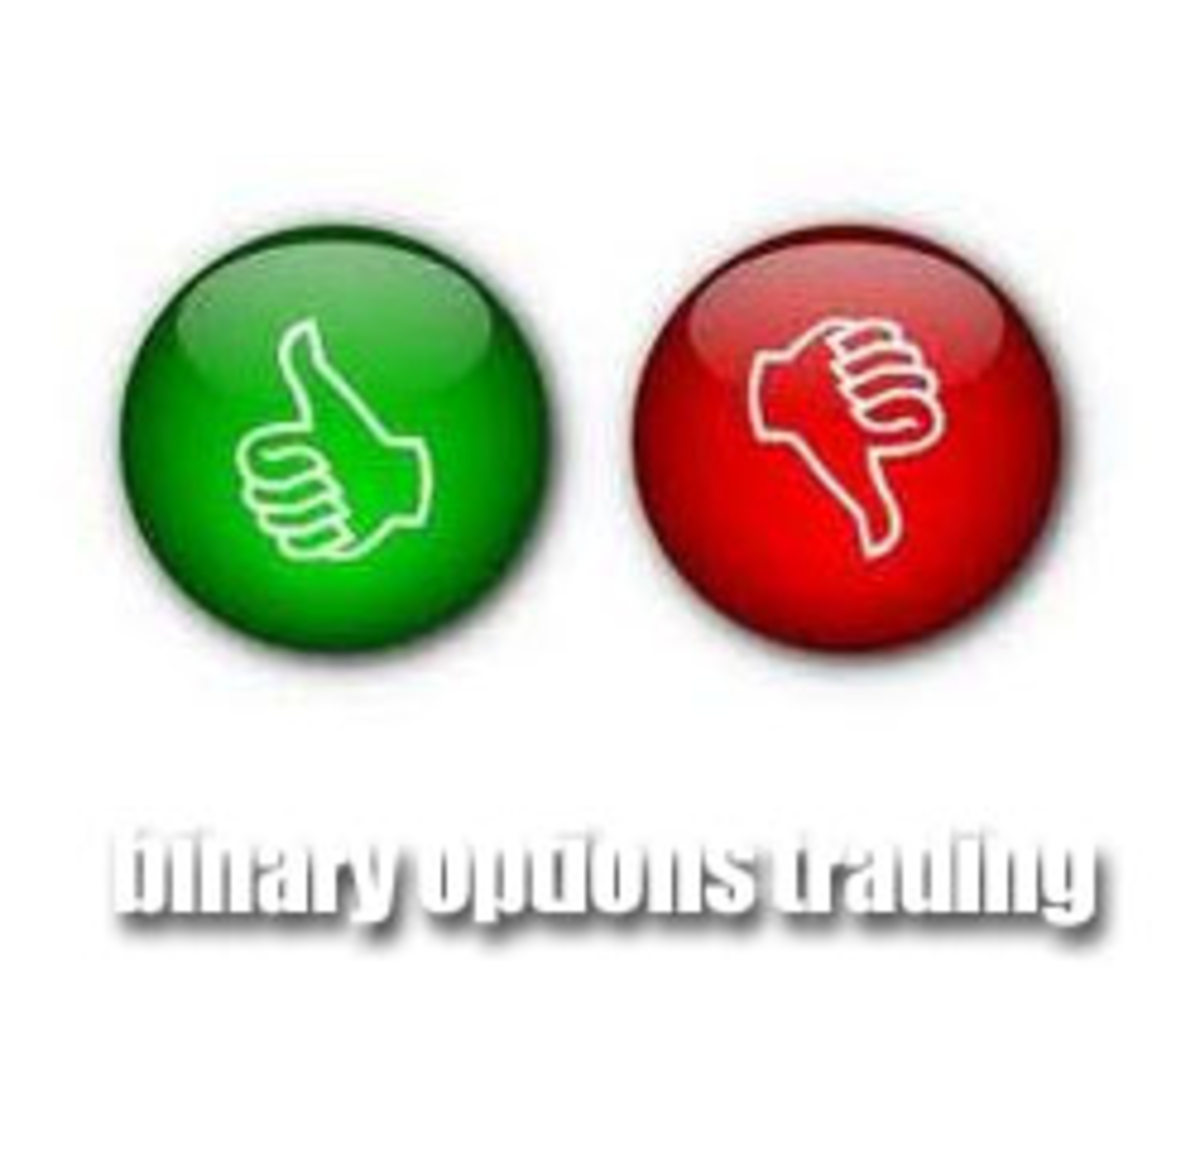 How to make money trading binary options